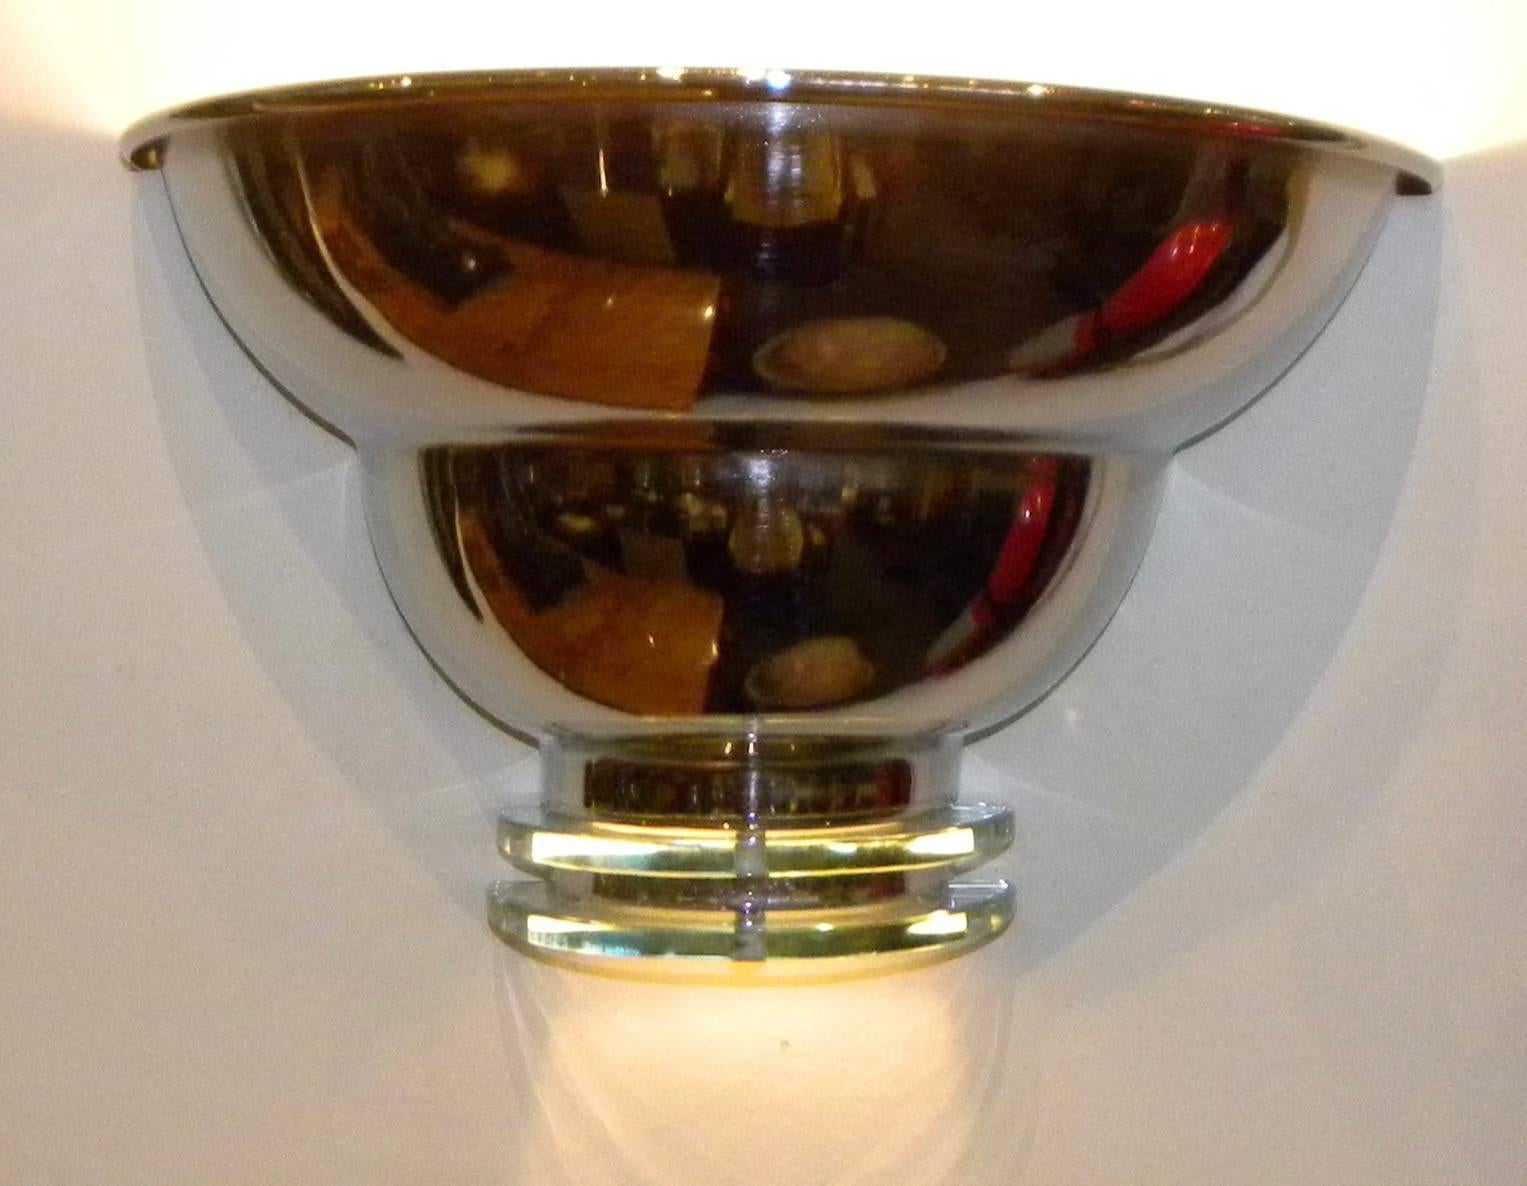 Vintage Art Deco Streamline modern sconces. Wonderful design and a real find, right now we have three pairs available. Newly re-chromed metal with fresh electronics. The glass disks on the bottom are clear and light up as well. Here is a chance for